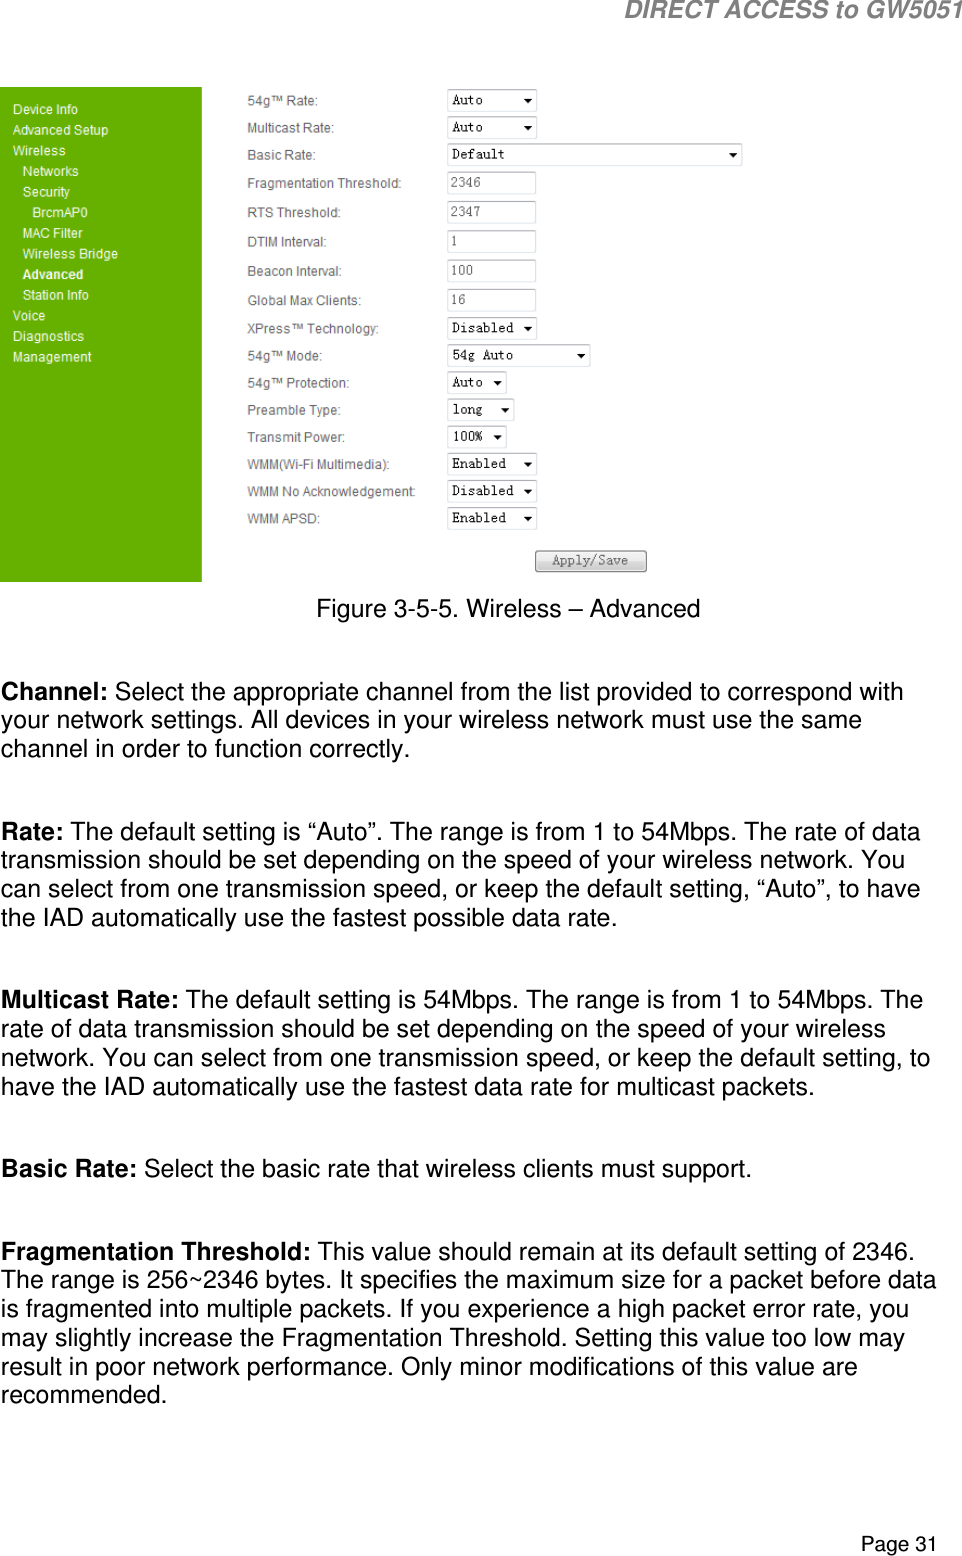                                                                                                                                                                                                                           DIRECT ACCESS to GW5051    Page 31   Figure 3-5-5. Wireless – Advanced  Channel: Select the appropriate channel from the list provided to correspond with your network settings. All devices in your wireless network must use the same channel in order to function correctly.  Rate: The default setting is “Auto”. The range is from 1 to 54Mbps. The rate of data transmission should be set depending on the speed of your wireless network. You can select from one transmission speed, or keep the default setting, “Auto”, to have the IAD automatically use the fastest possible data rate.  Multicast Rate: The default setting is 54Mbps. The range is from 1 to 54Mbps. The rate of data transmission should be set depending on the speed of your wireless network. You can select from one transmission speed, or keep the default setting, to have the IAD automatically use the fastest data rate for multicast packets.  Basic Rate: Select the basic rate that wireless clients must support.  Fragmentation Threshold: This value should remain at its default setting of 2346. The range is 256~2346 bytes. It specifies the maximum size for a packet before data is fragmented into multiple packets. If you experience a high packet error rate, you may slightly increase the Fragmentation Threshold. Setting this value too low may result in poor network performance. Only minor modifications of this value are recommended.  